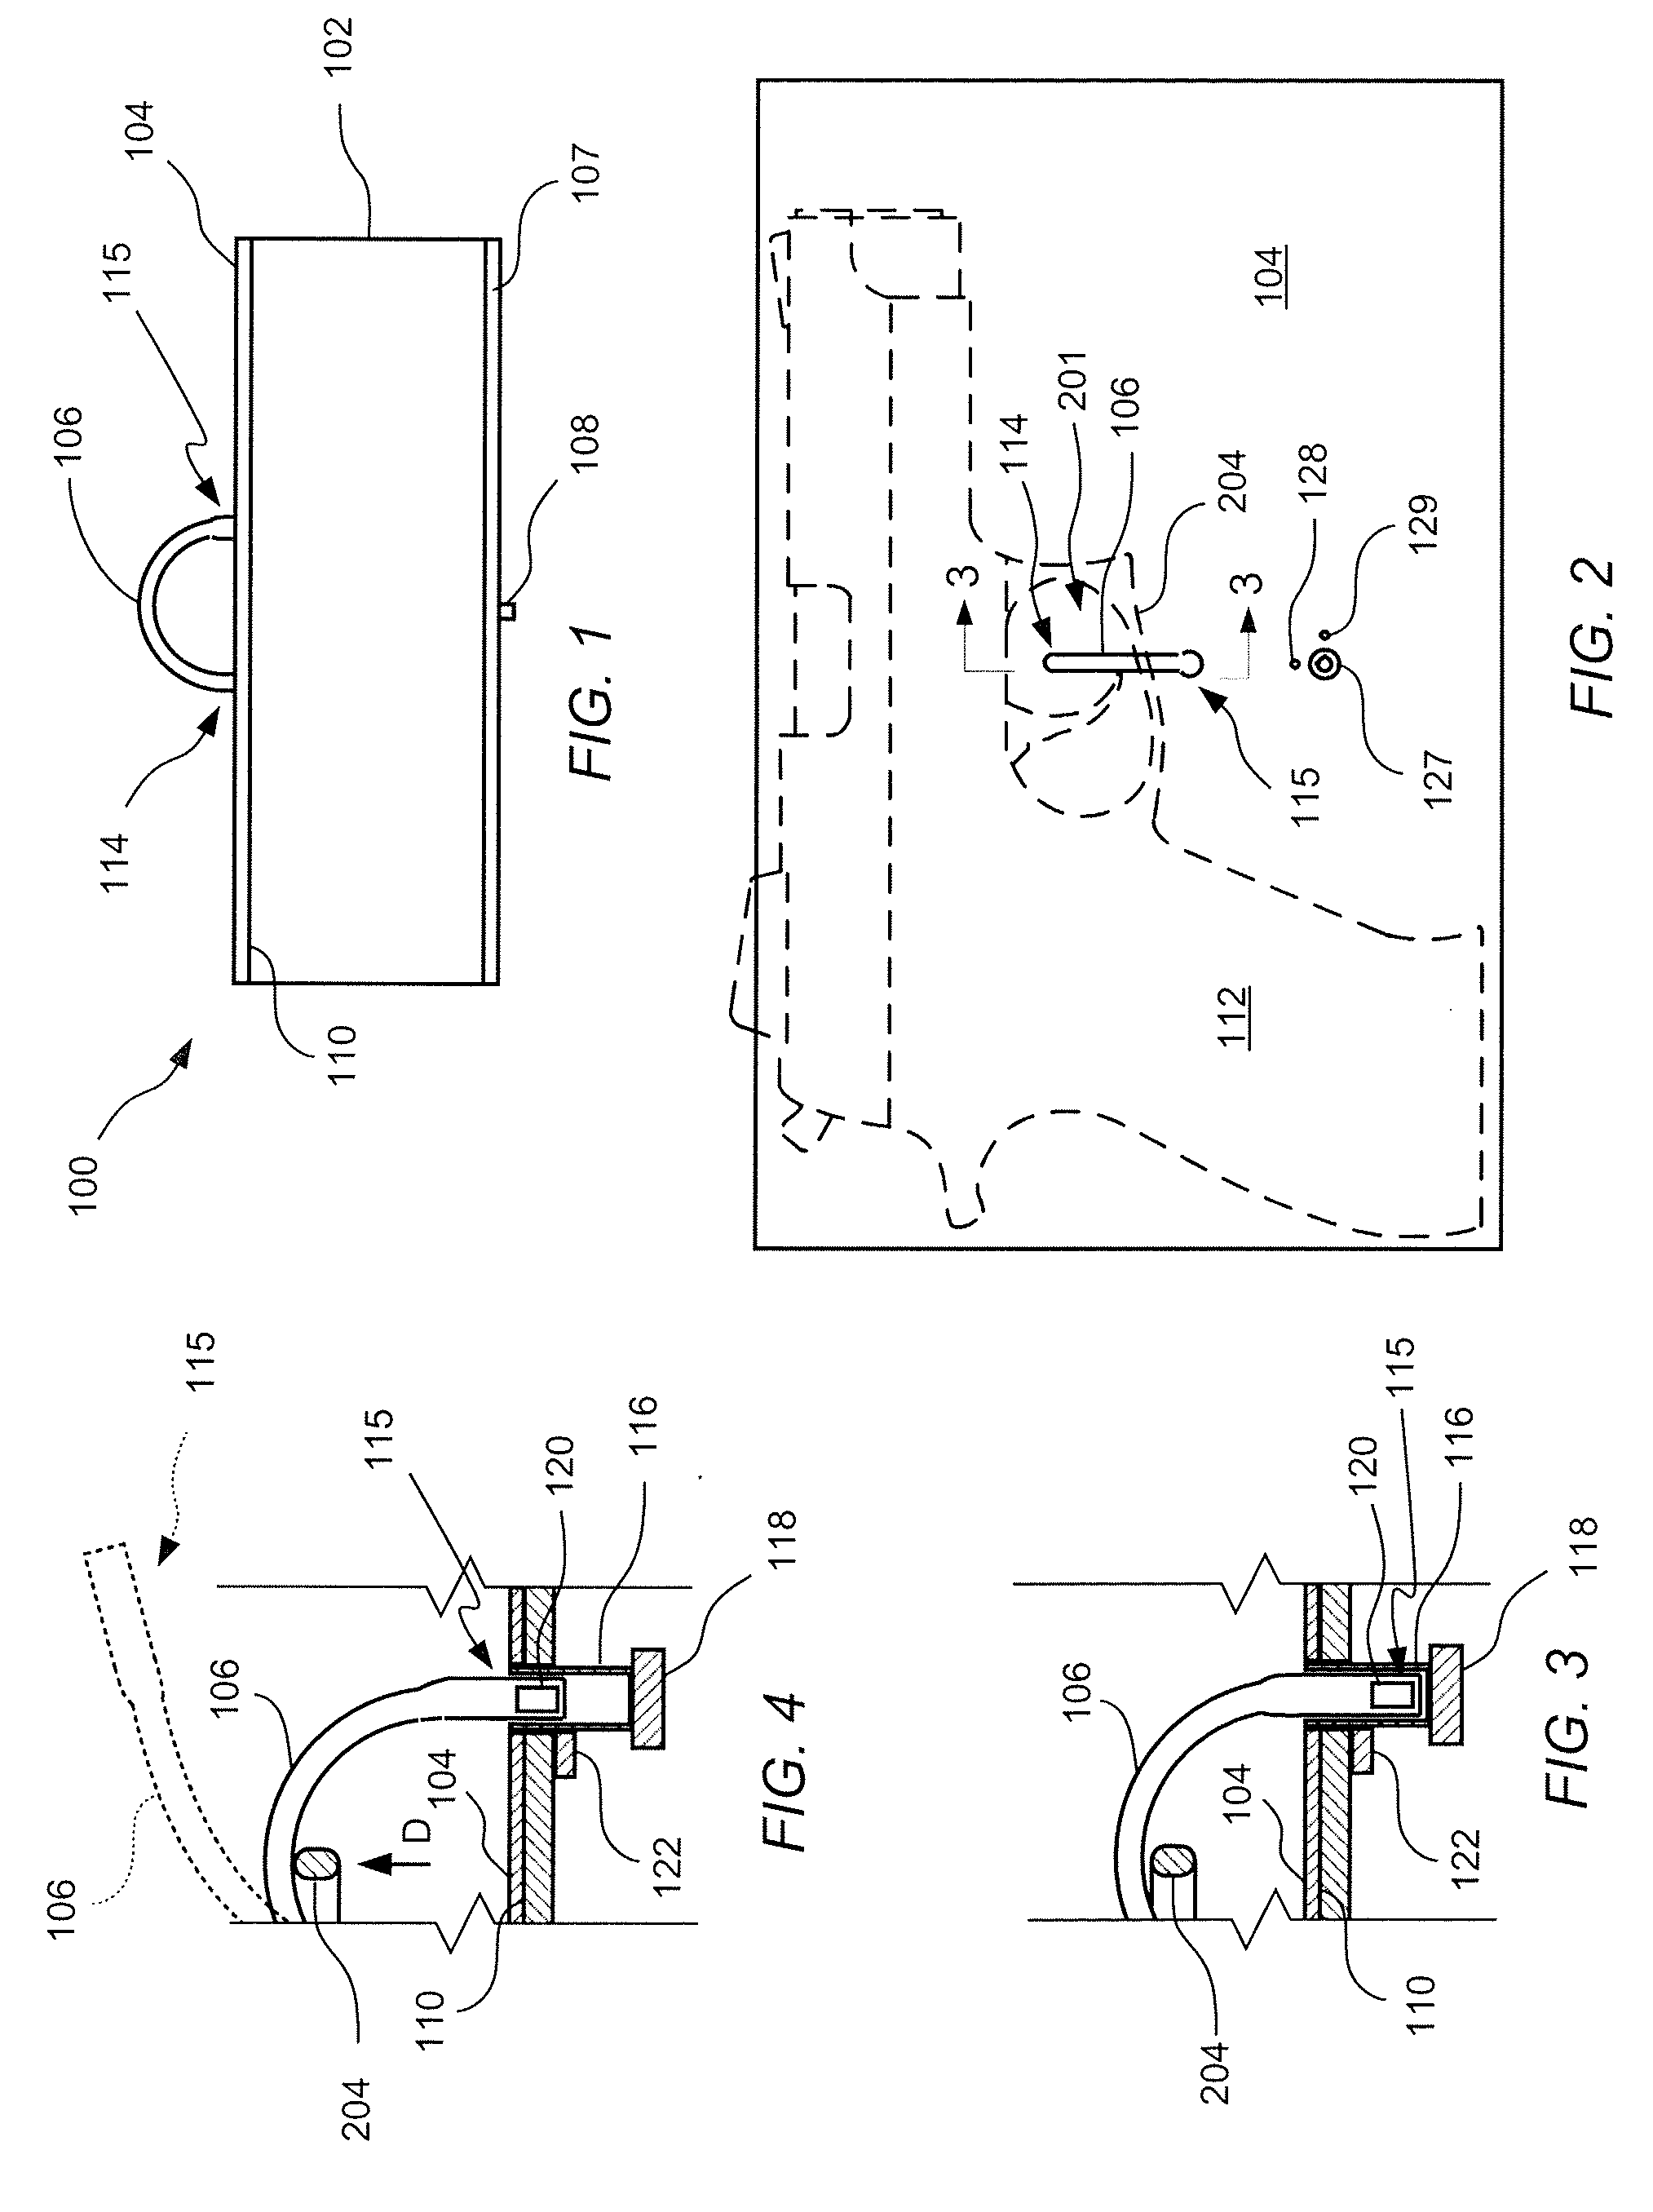 Interface between an object such as a firearm and an alarm or monitoring system